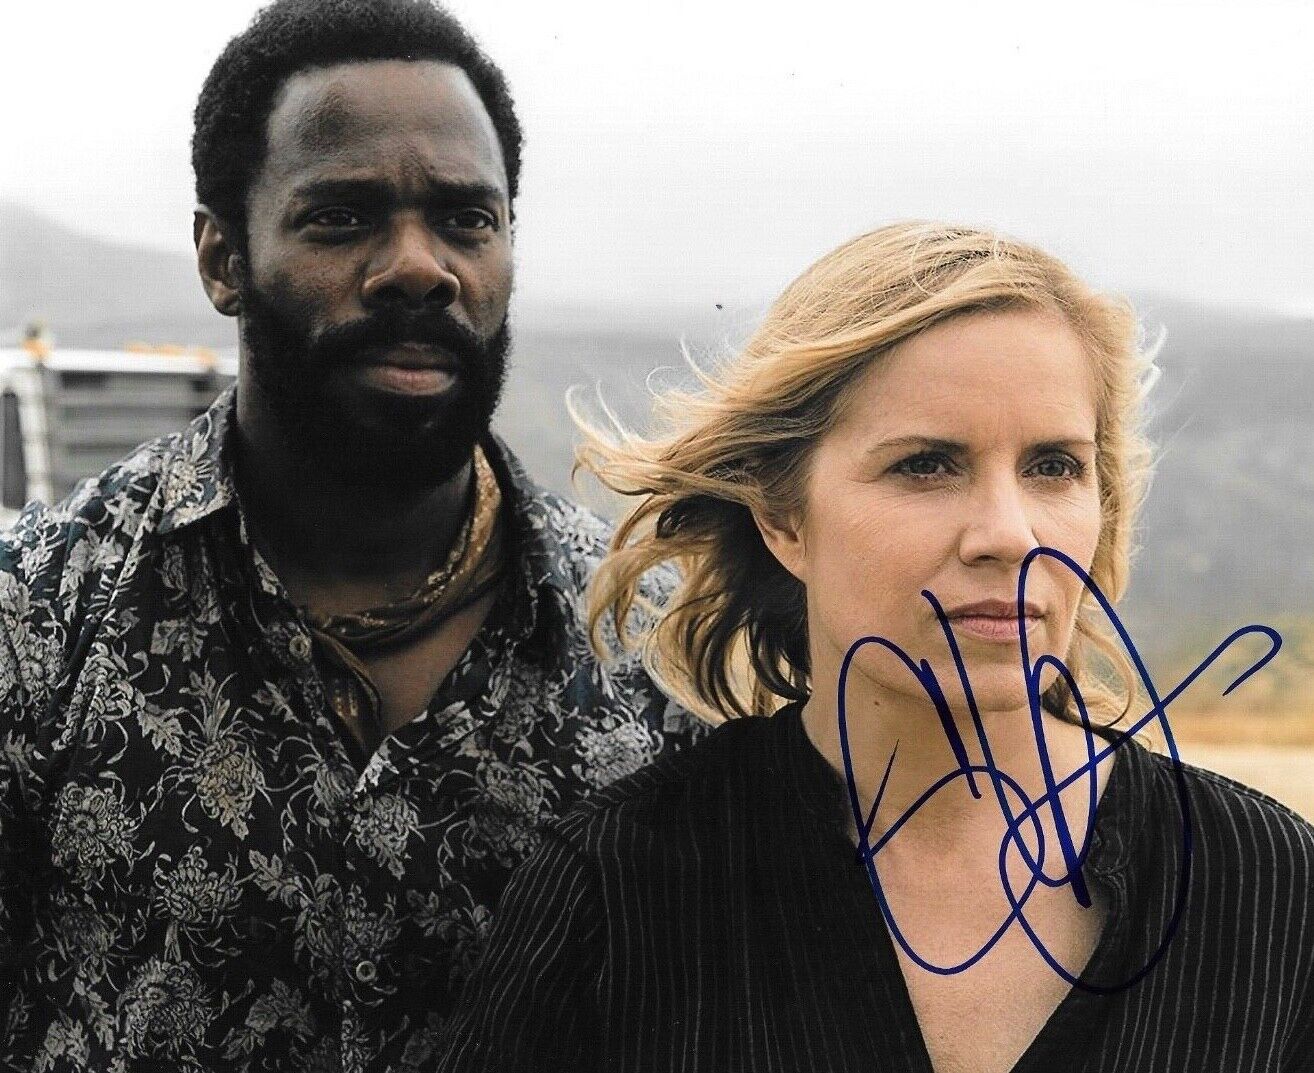 * COLMAN DOMINGO * signed 8x10 Photo Poster painting * FEAR THE WALKING DEAD * COA * 5